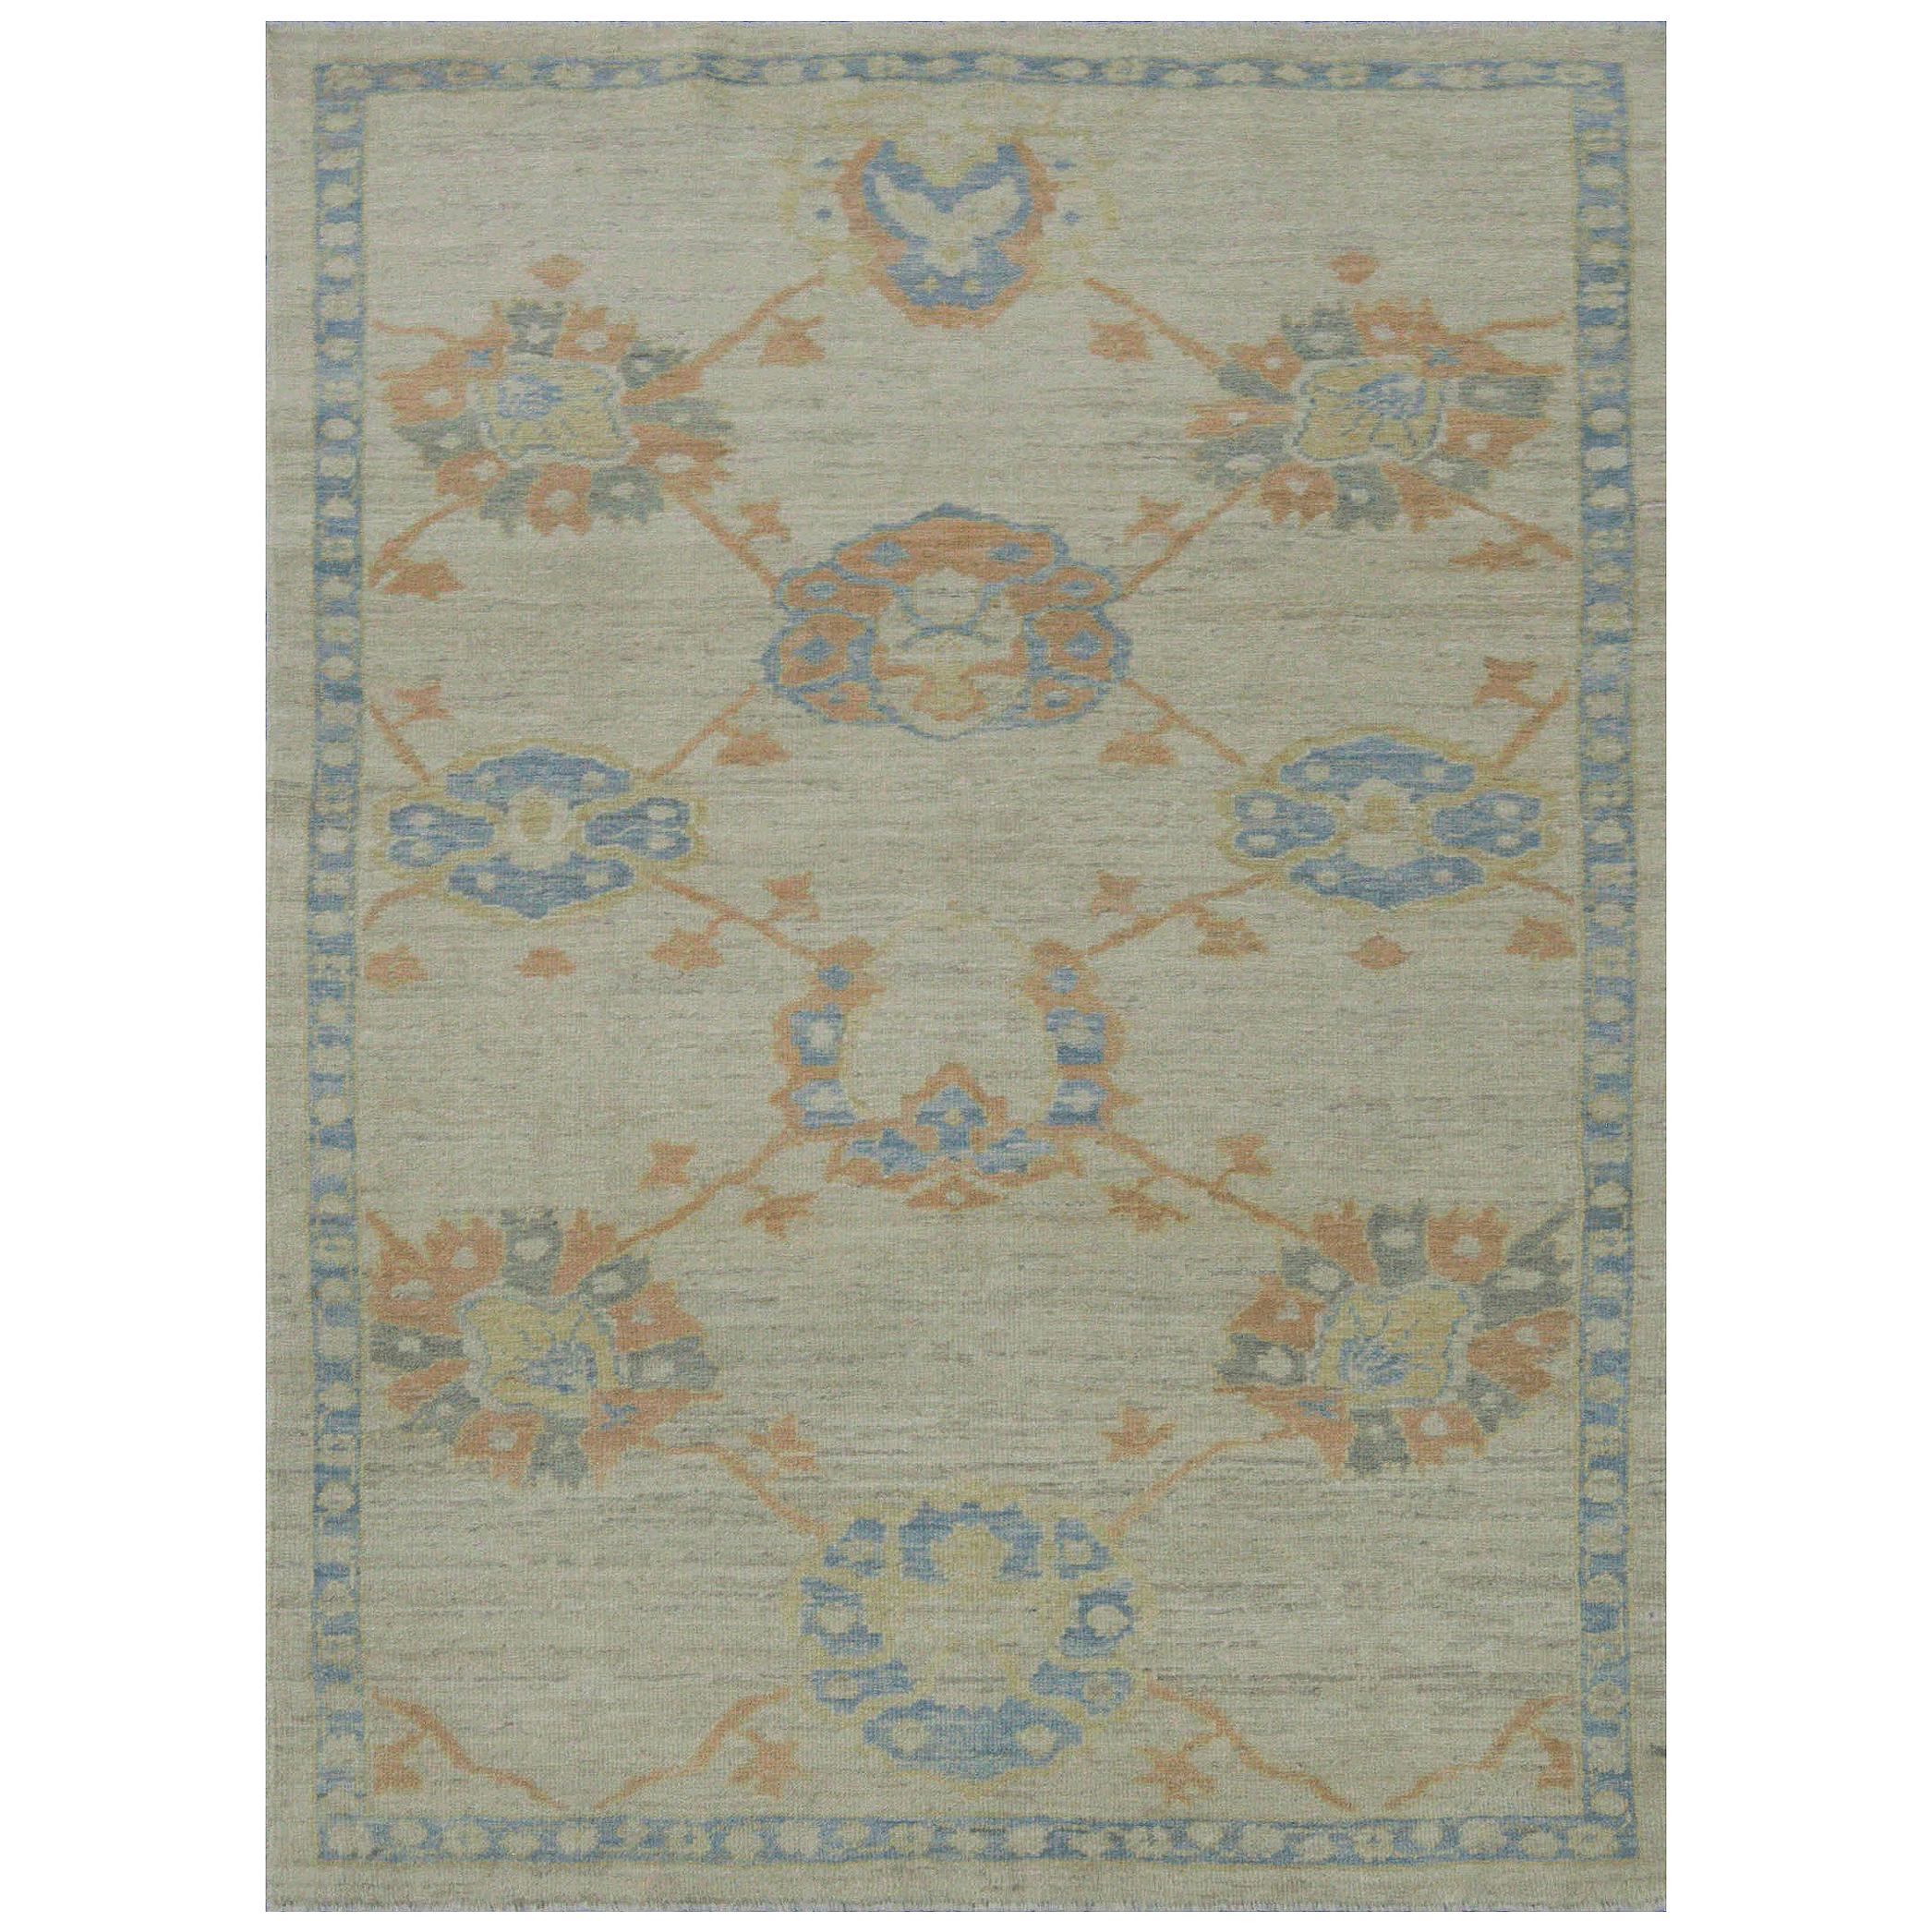 Modern Turkish Oushak Rug with Flower Heads in Blue and Orange on Ivory Field